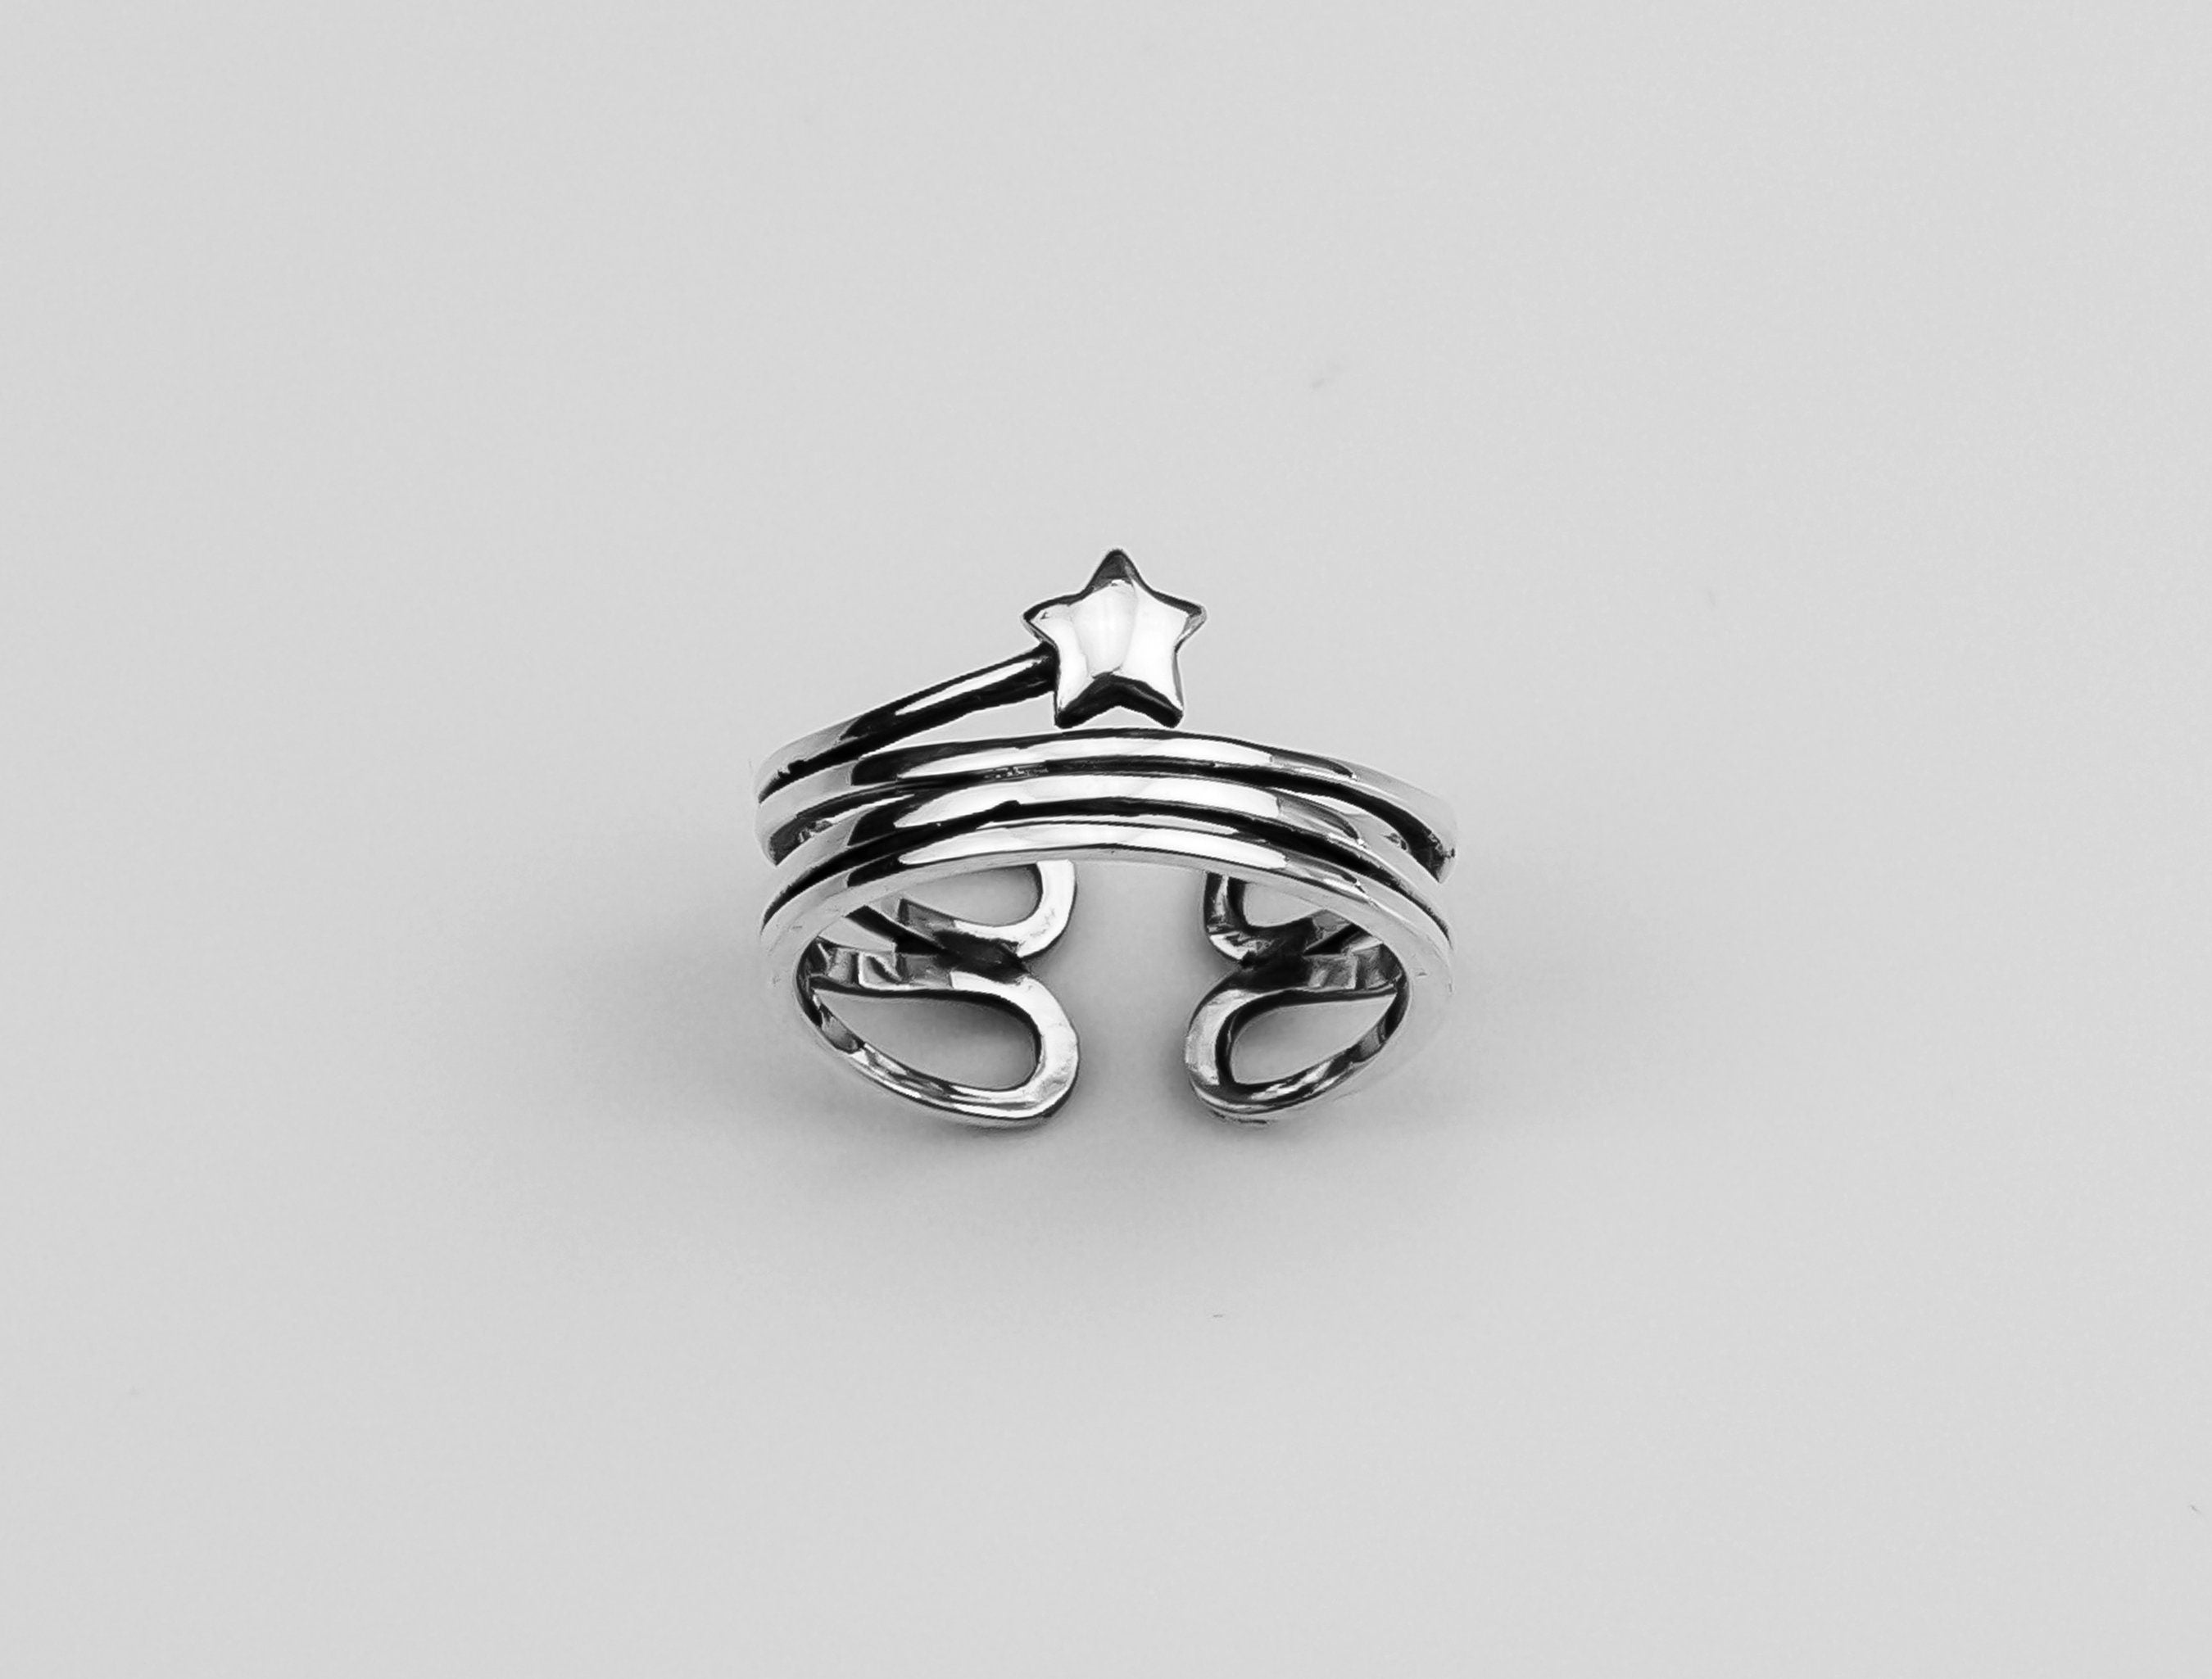 Silver Chunky Ring, Boho Silver Ring, Adjustable Silver Ring, Best Gift for Women, Sterling Silver Stackable Ring, Silver Ring with Star